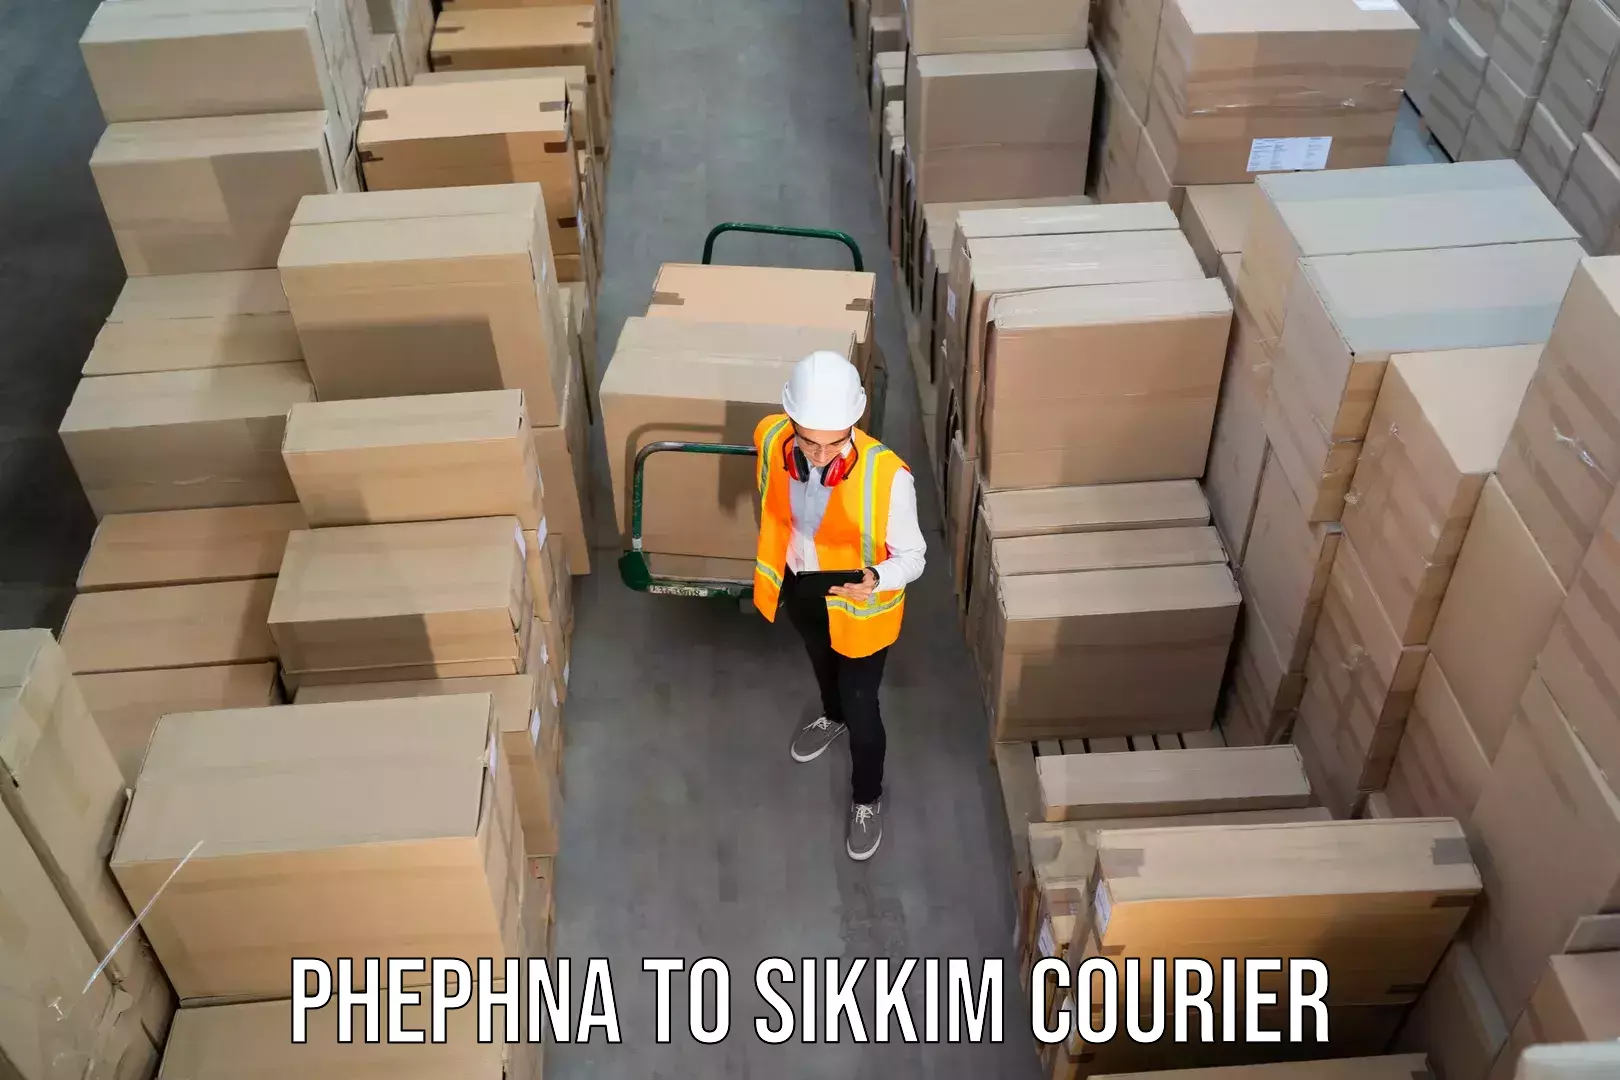 Flexible delivery schedules Phephna to Rongli